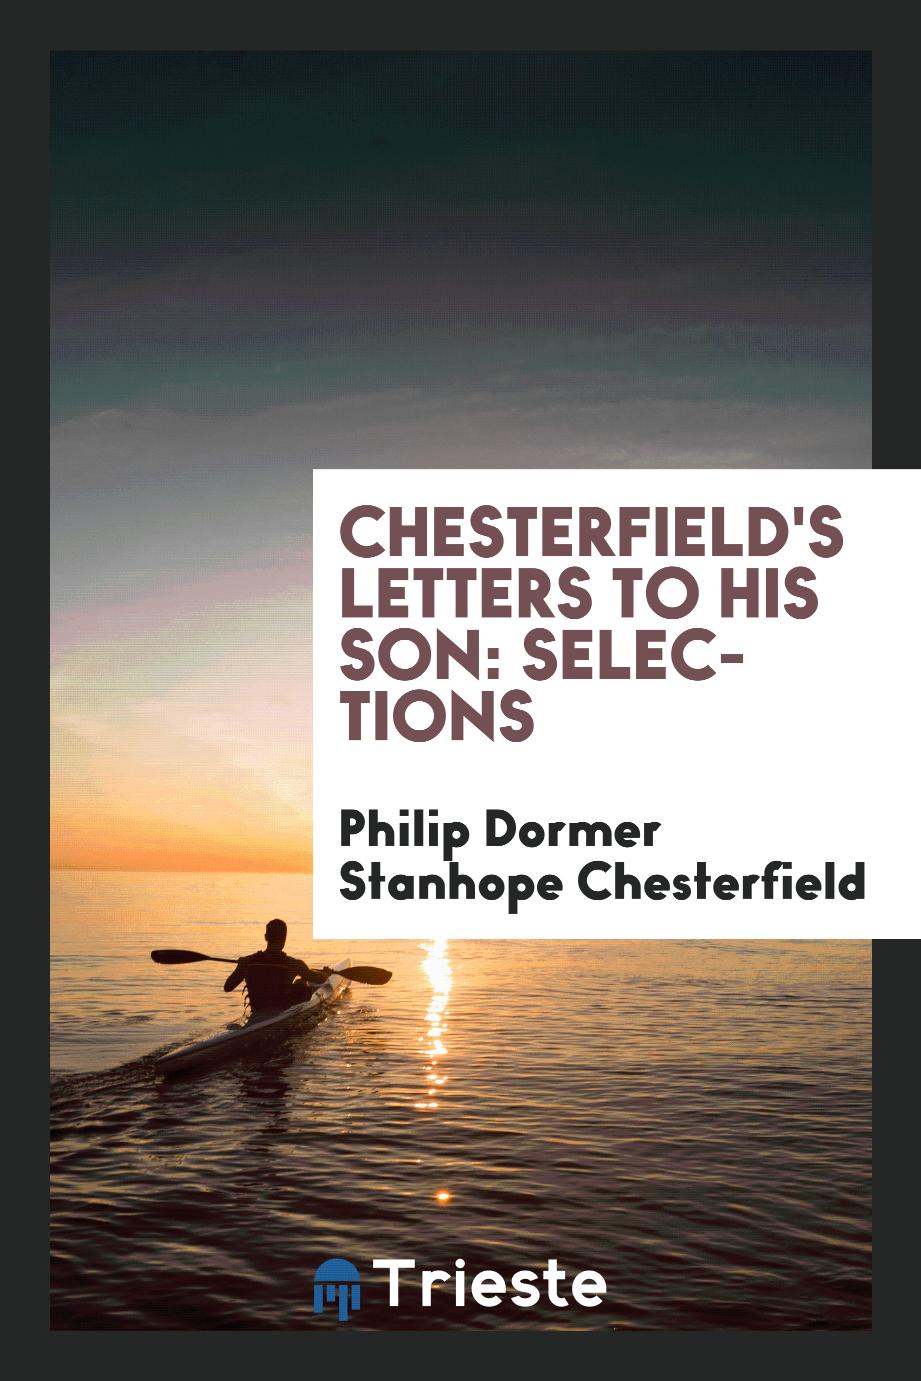 Chesterfield's letters to his son: selections